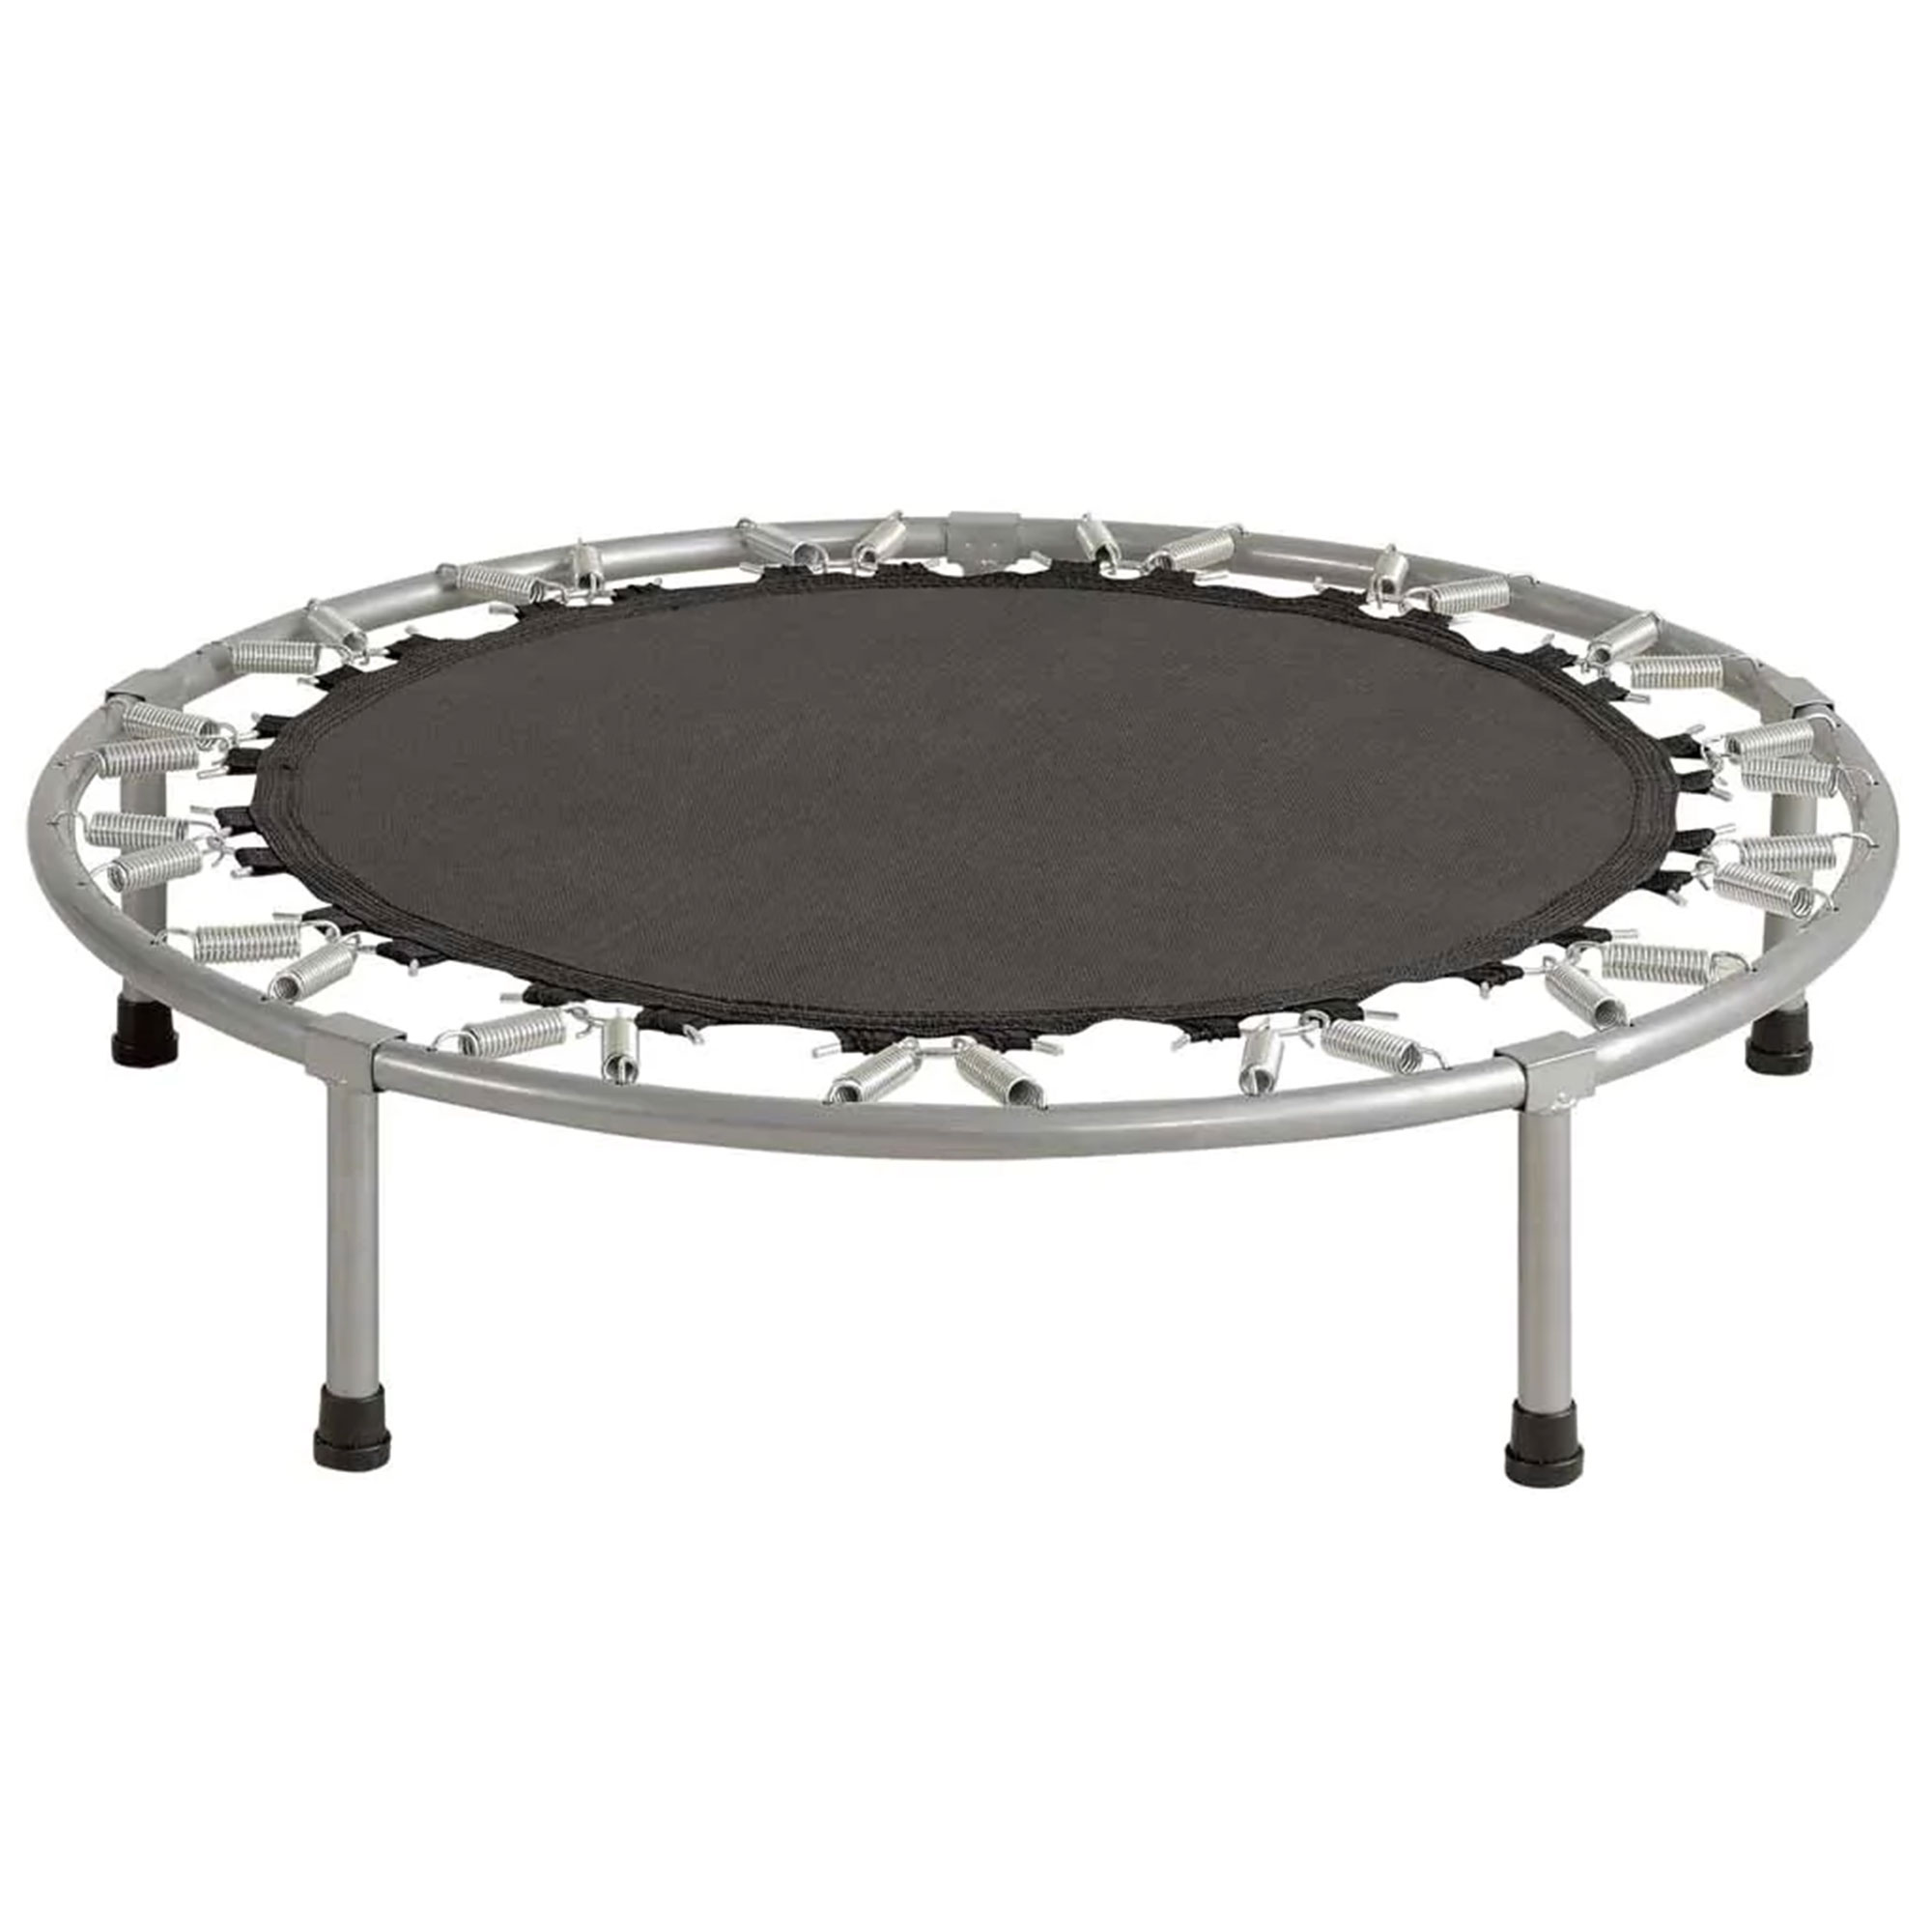 Upper Bounce Trampoline Replacement Mat for 14 Foot Round Frames - image 4 of 4